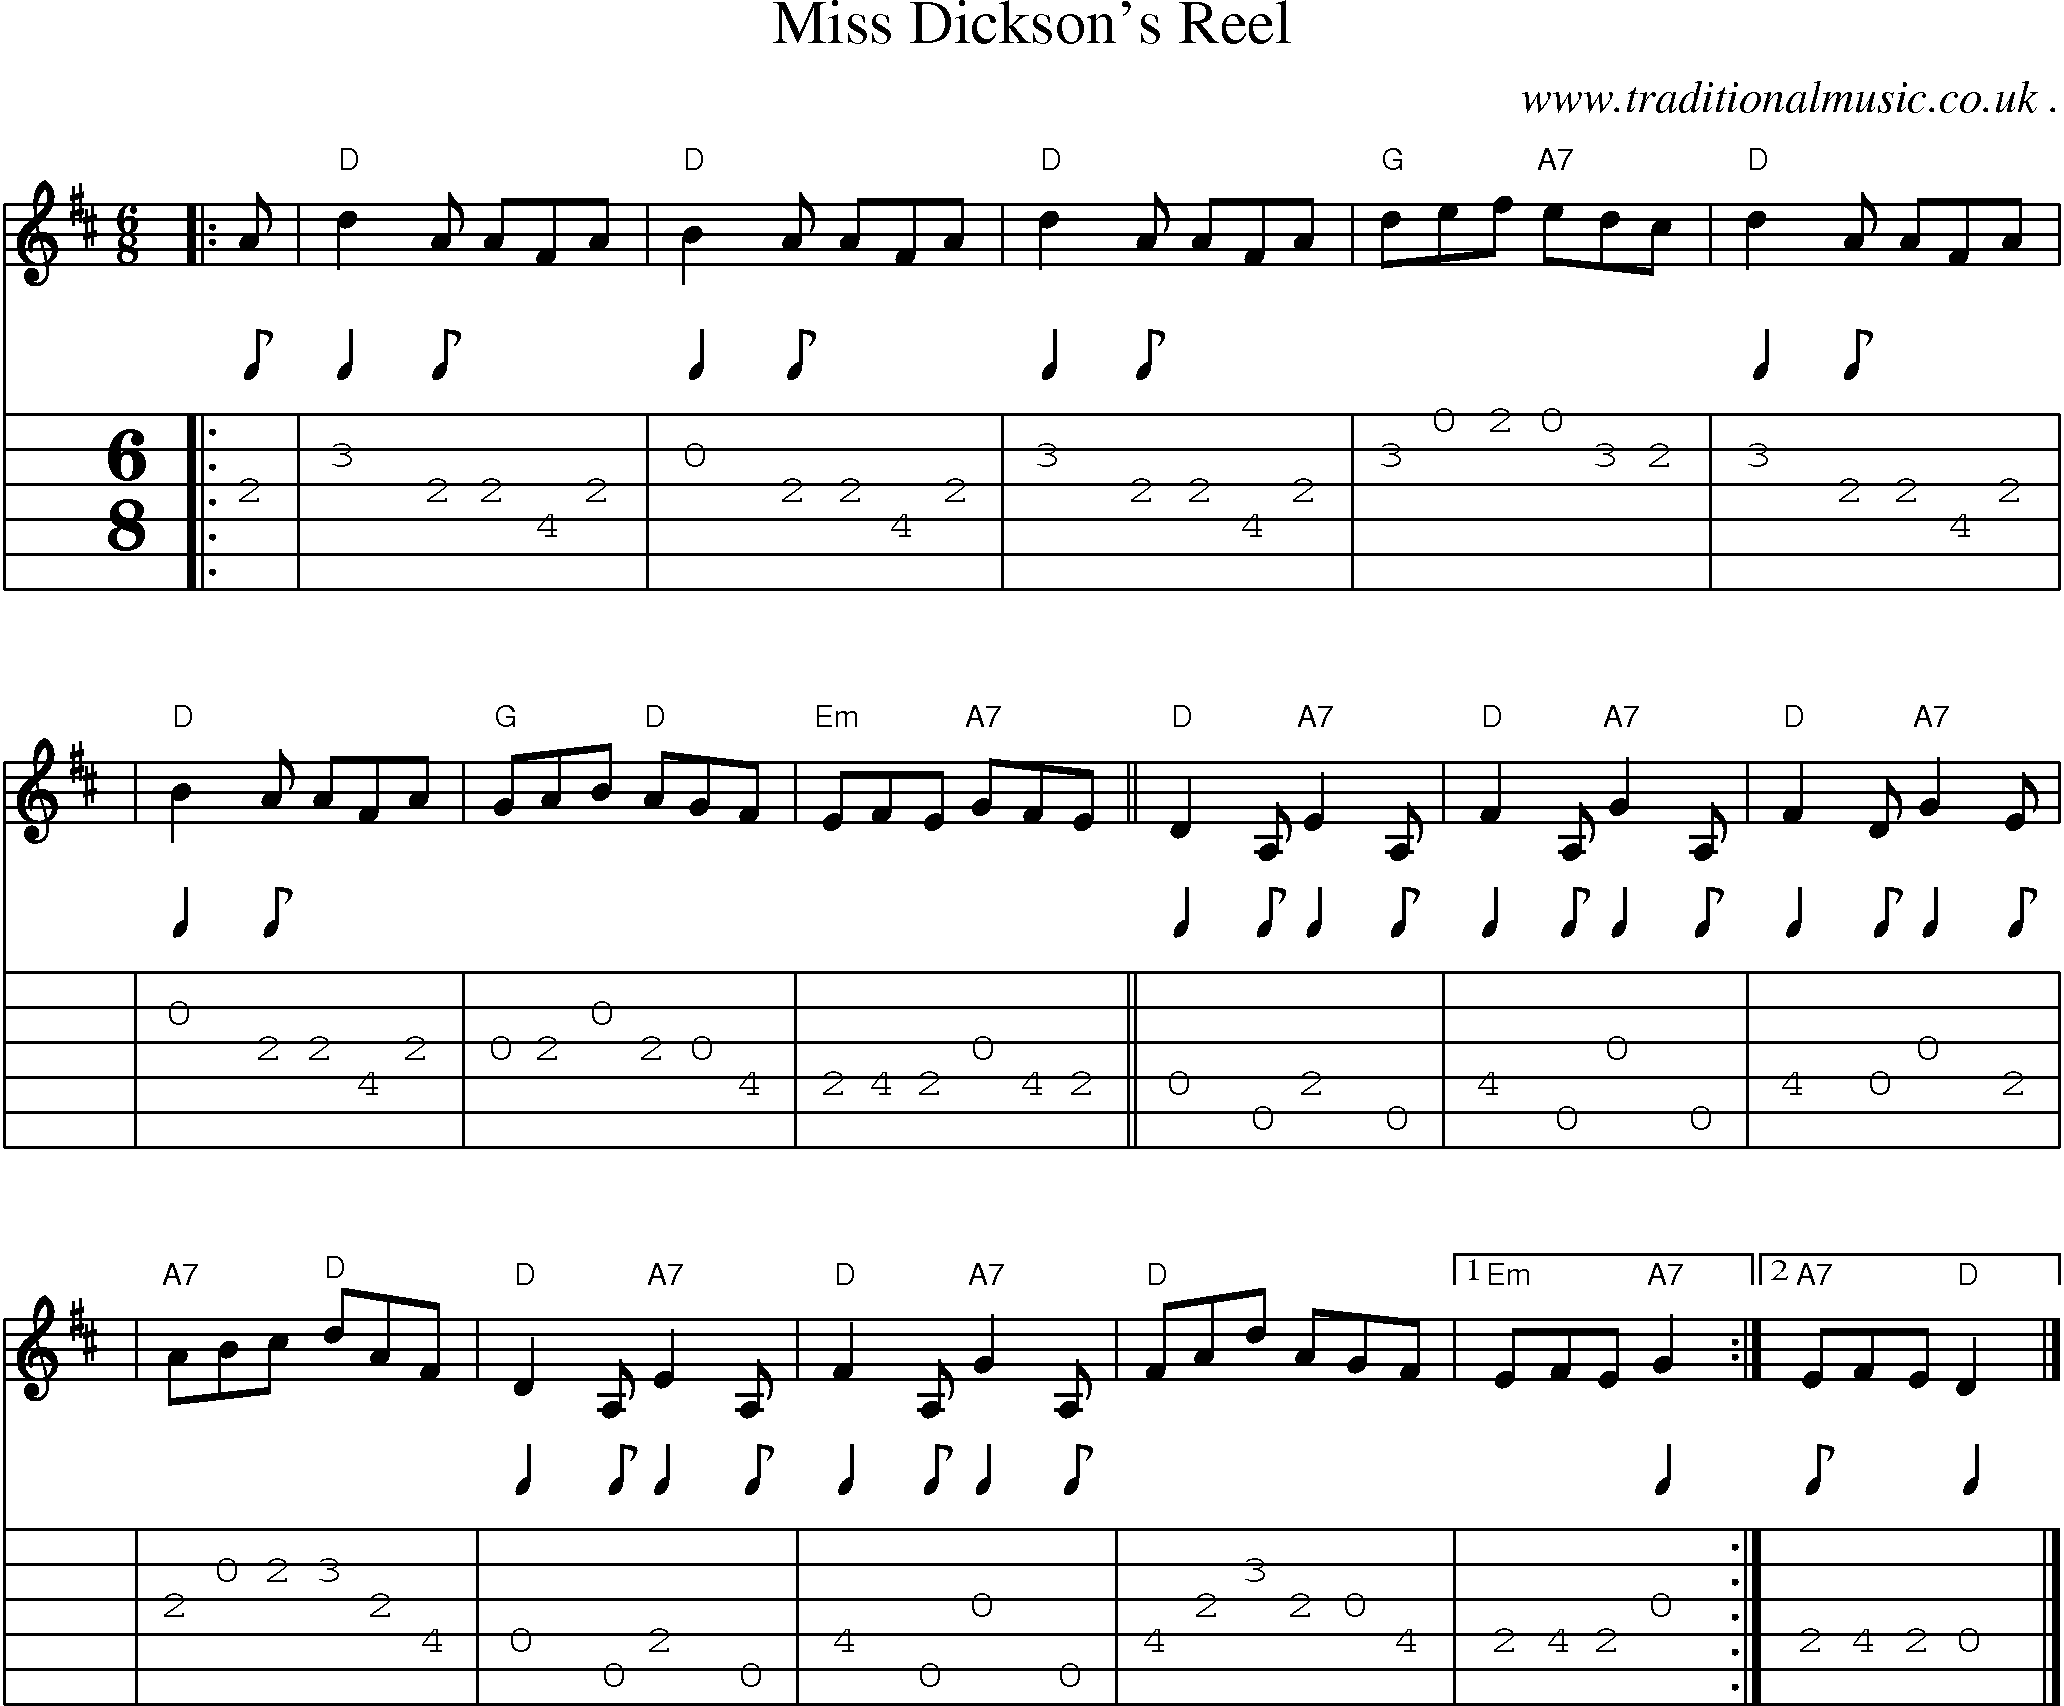 Sheet-music  score, Chords and Guitar Tabs for Miss Dicksons Reel